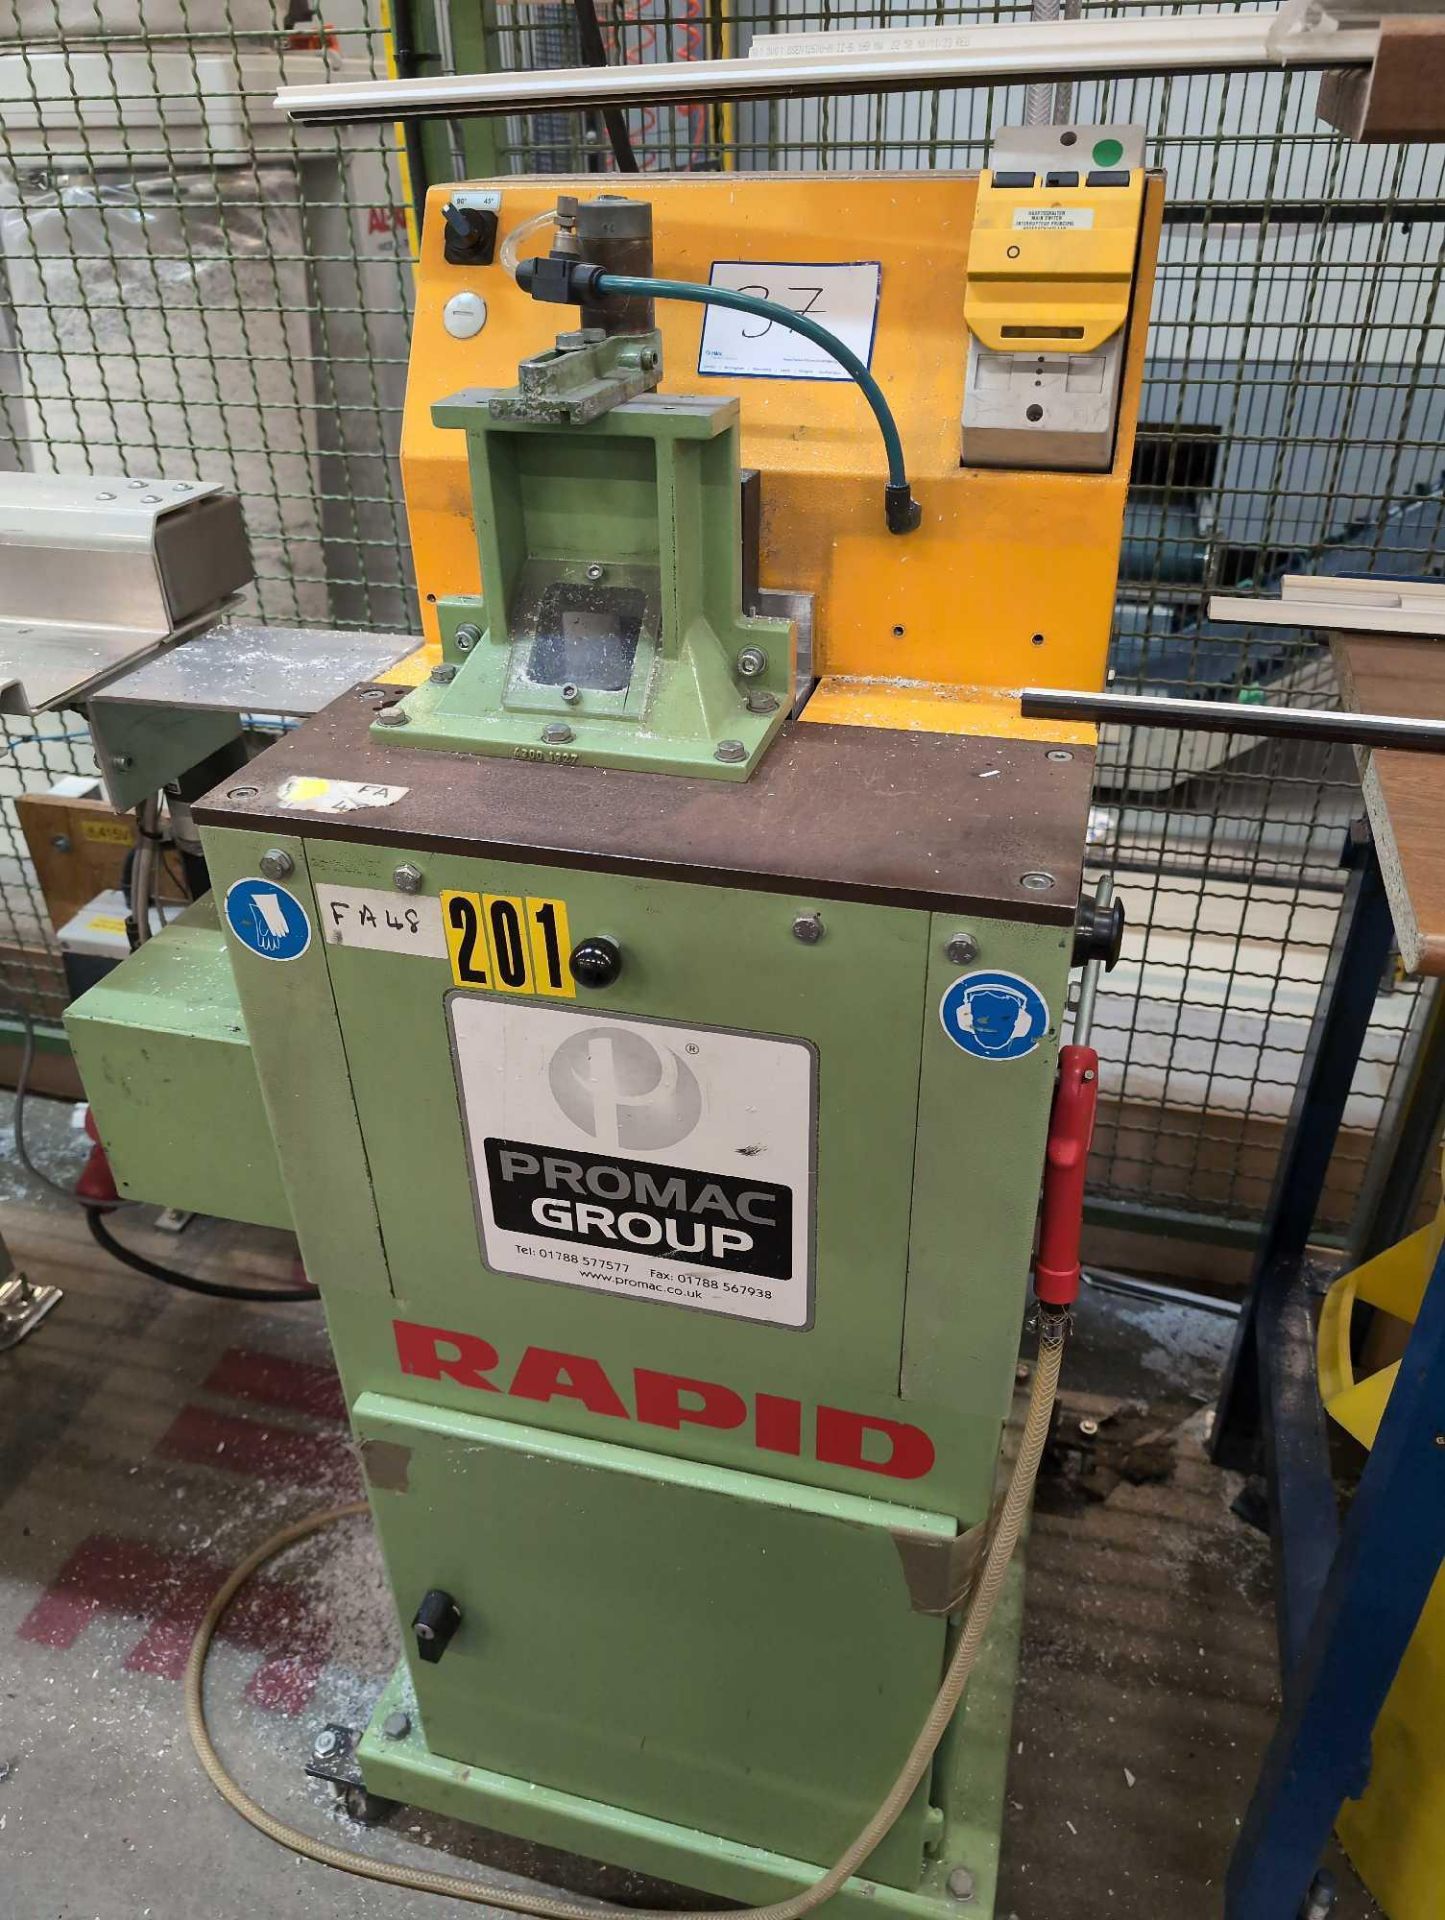 1: Rapid, Promac Group GMS, Bead Saw, Serial Number: 22001402, Year of Manufacture: 2009